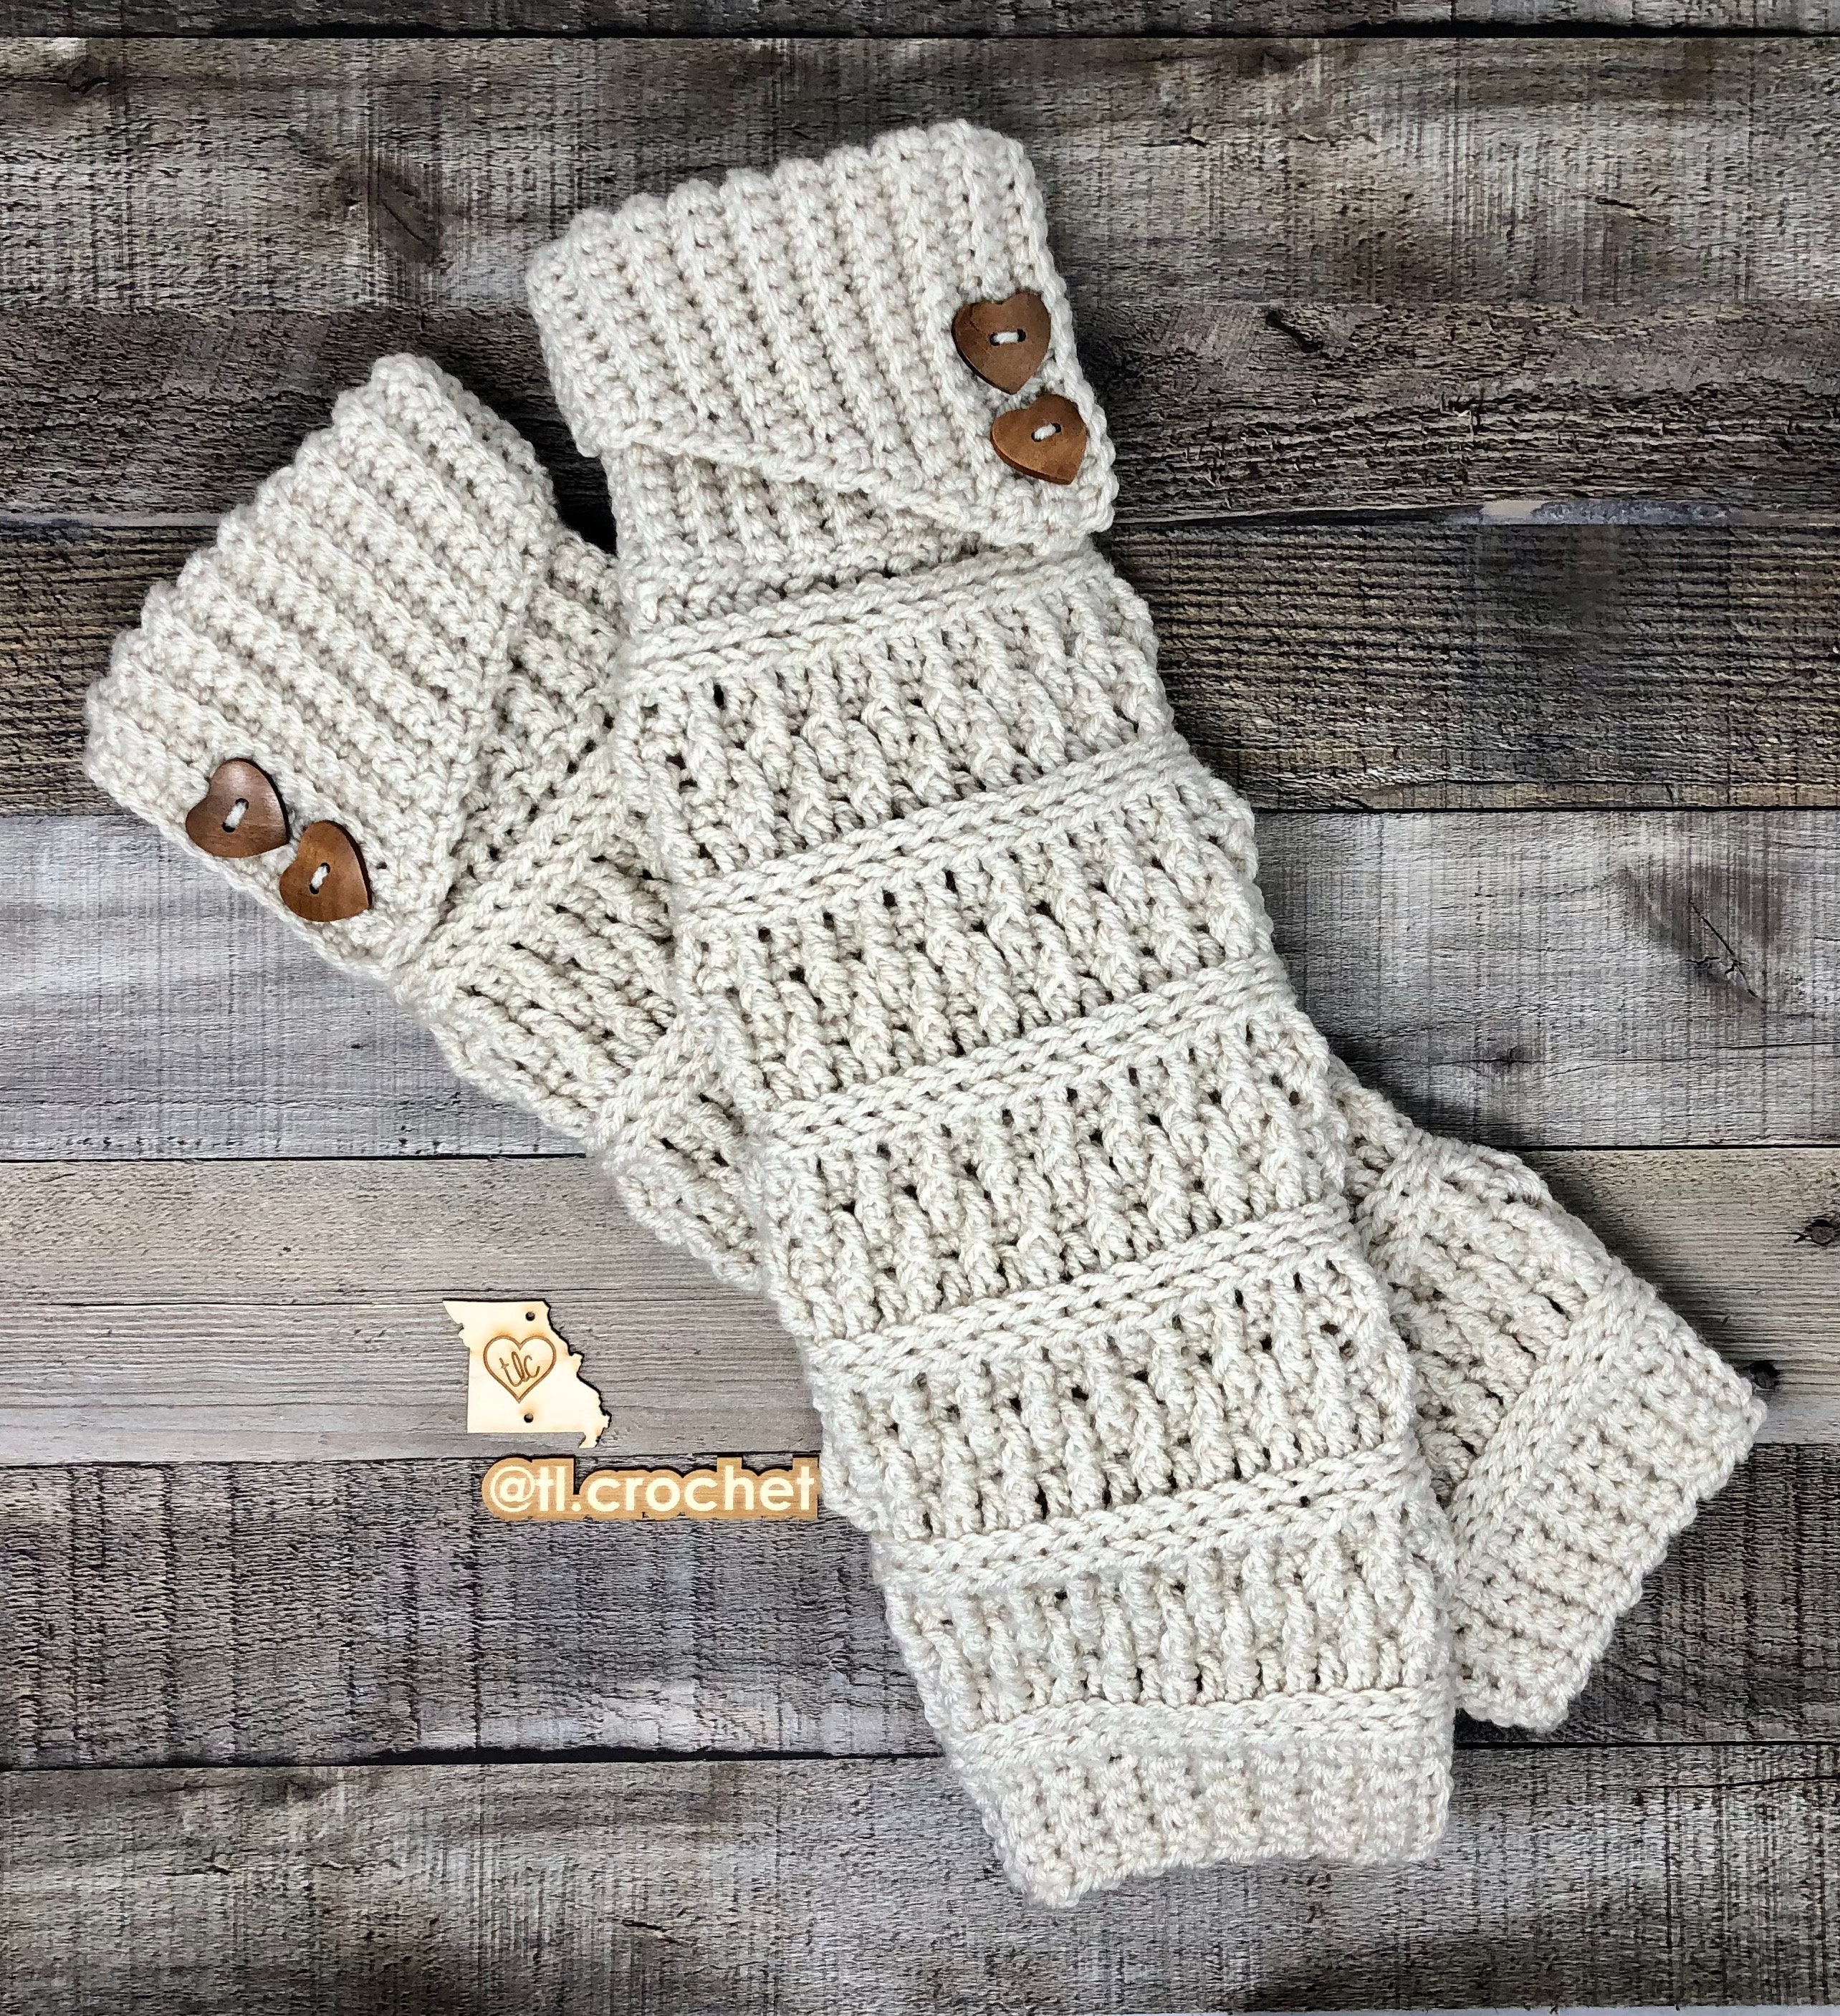 Turnberry Leg Warmers, Crochet PDF Digital Download Pattern, Decorative  Buttons, Mommy and Me, Crochet Leg Warmers, Leg Warmers Pattern -   Canada